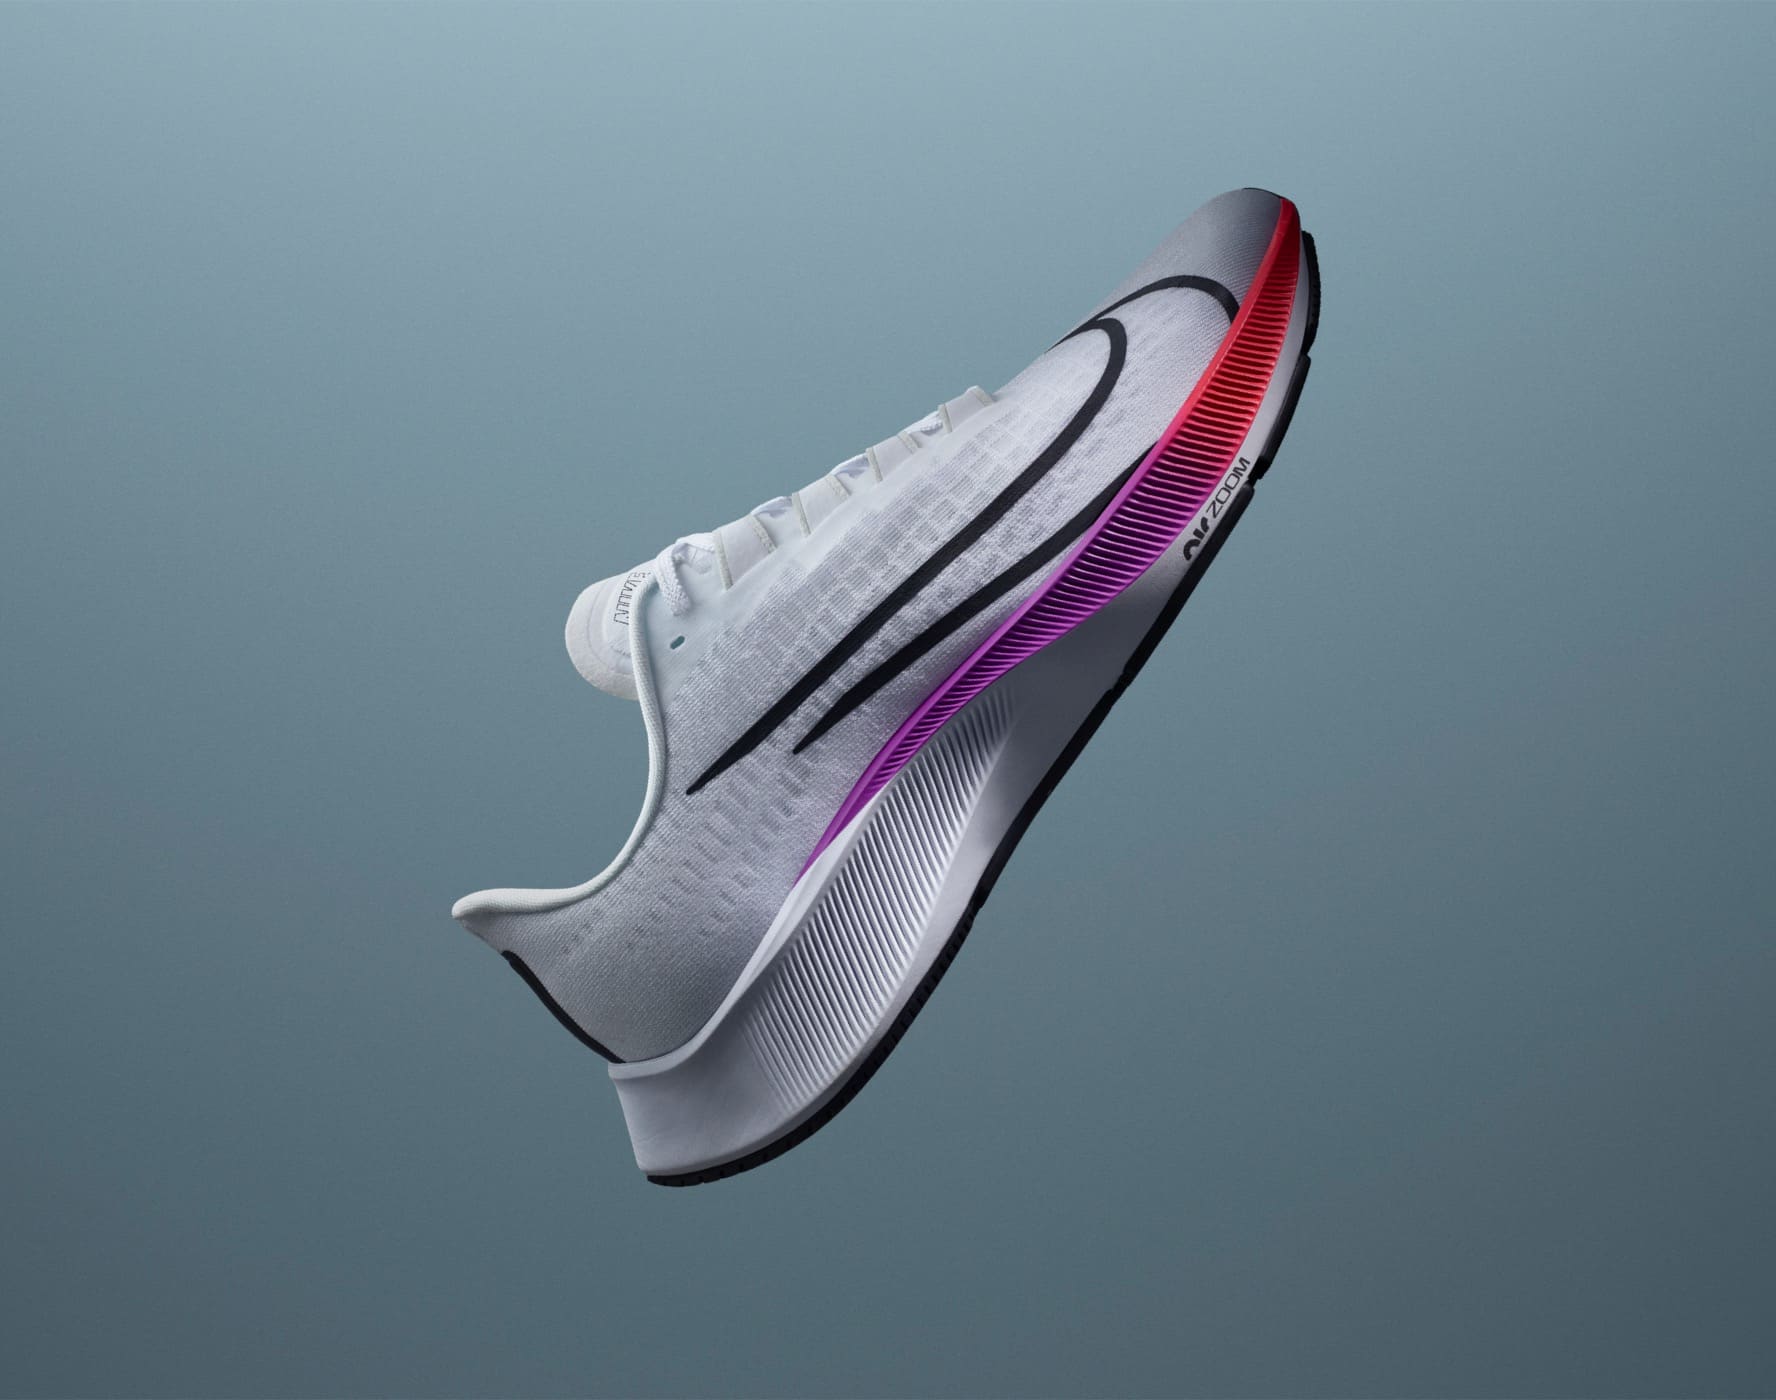 Lauw Krijt Succes Nike Vaporfly. Featuring the new Vaporfly NEXT%. Nike GB